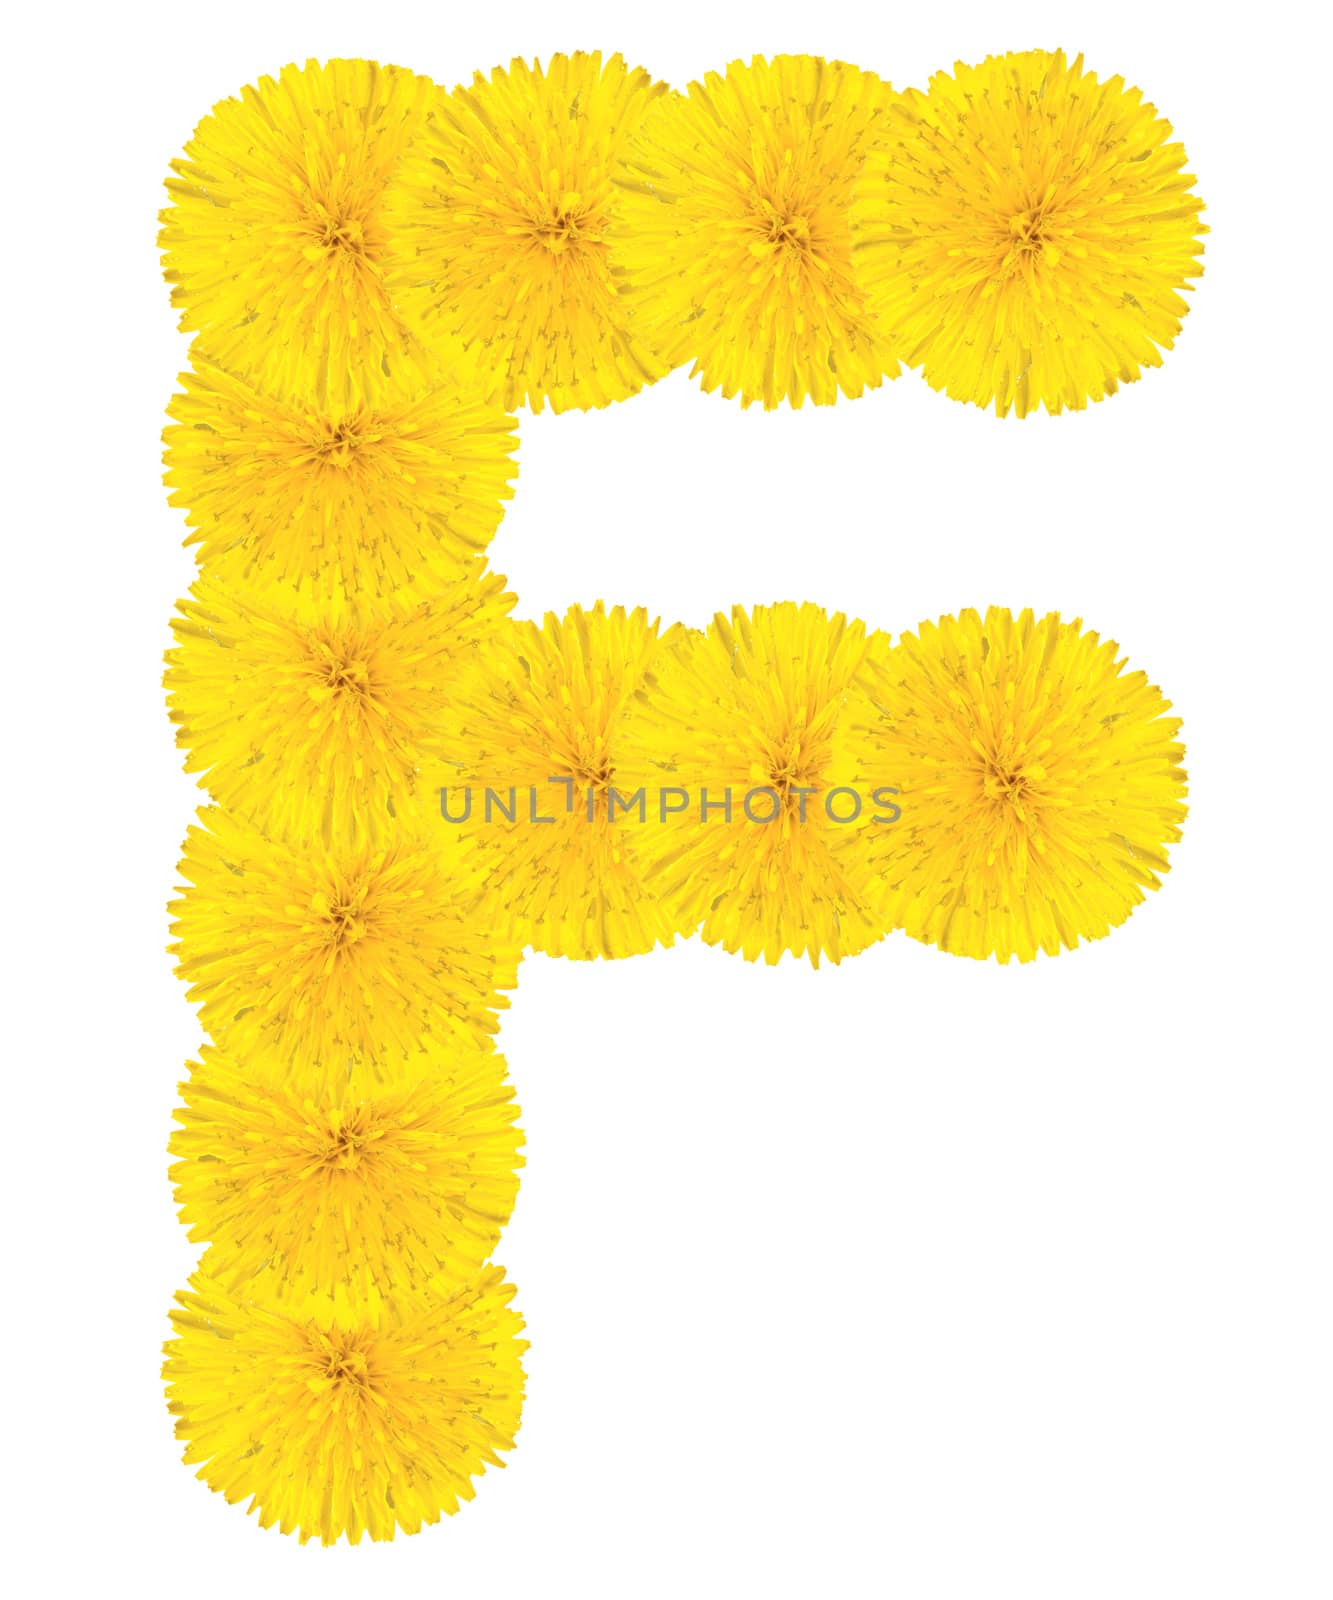 Letter F made from dandelions by Valengilda